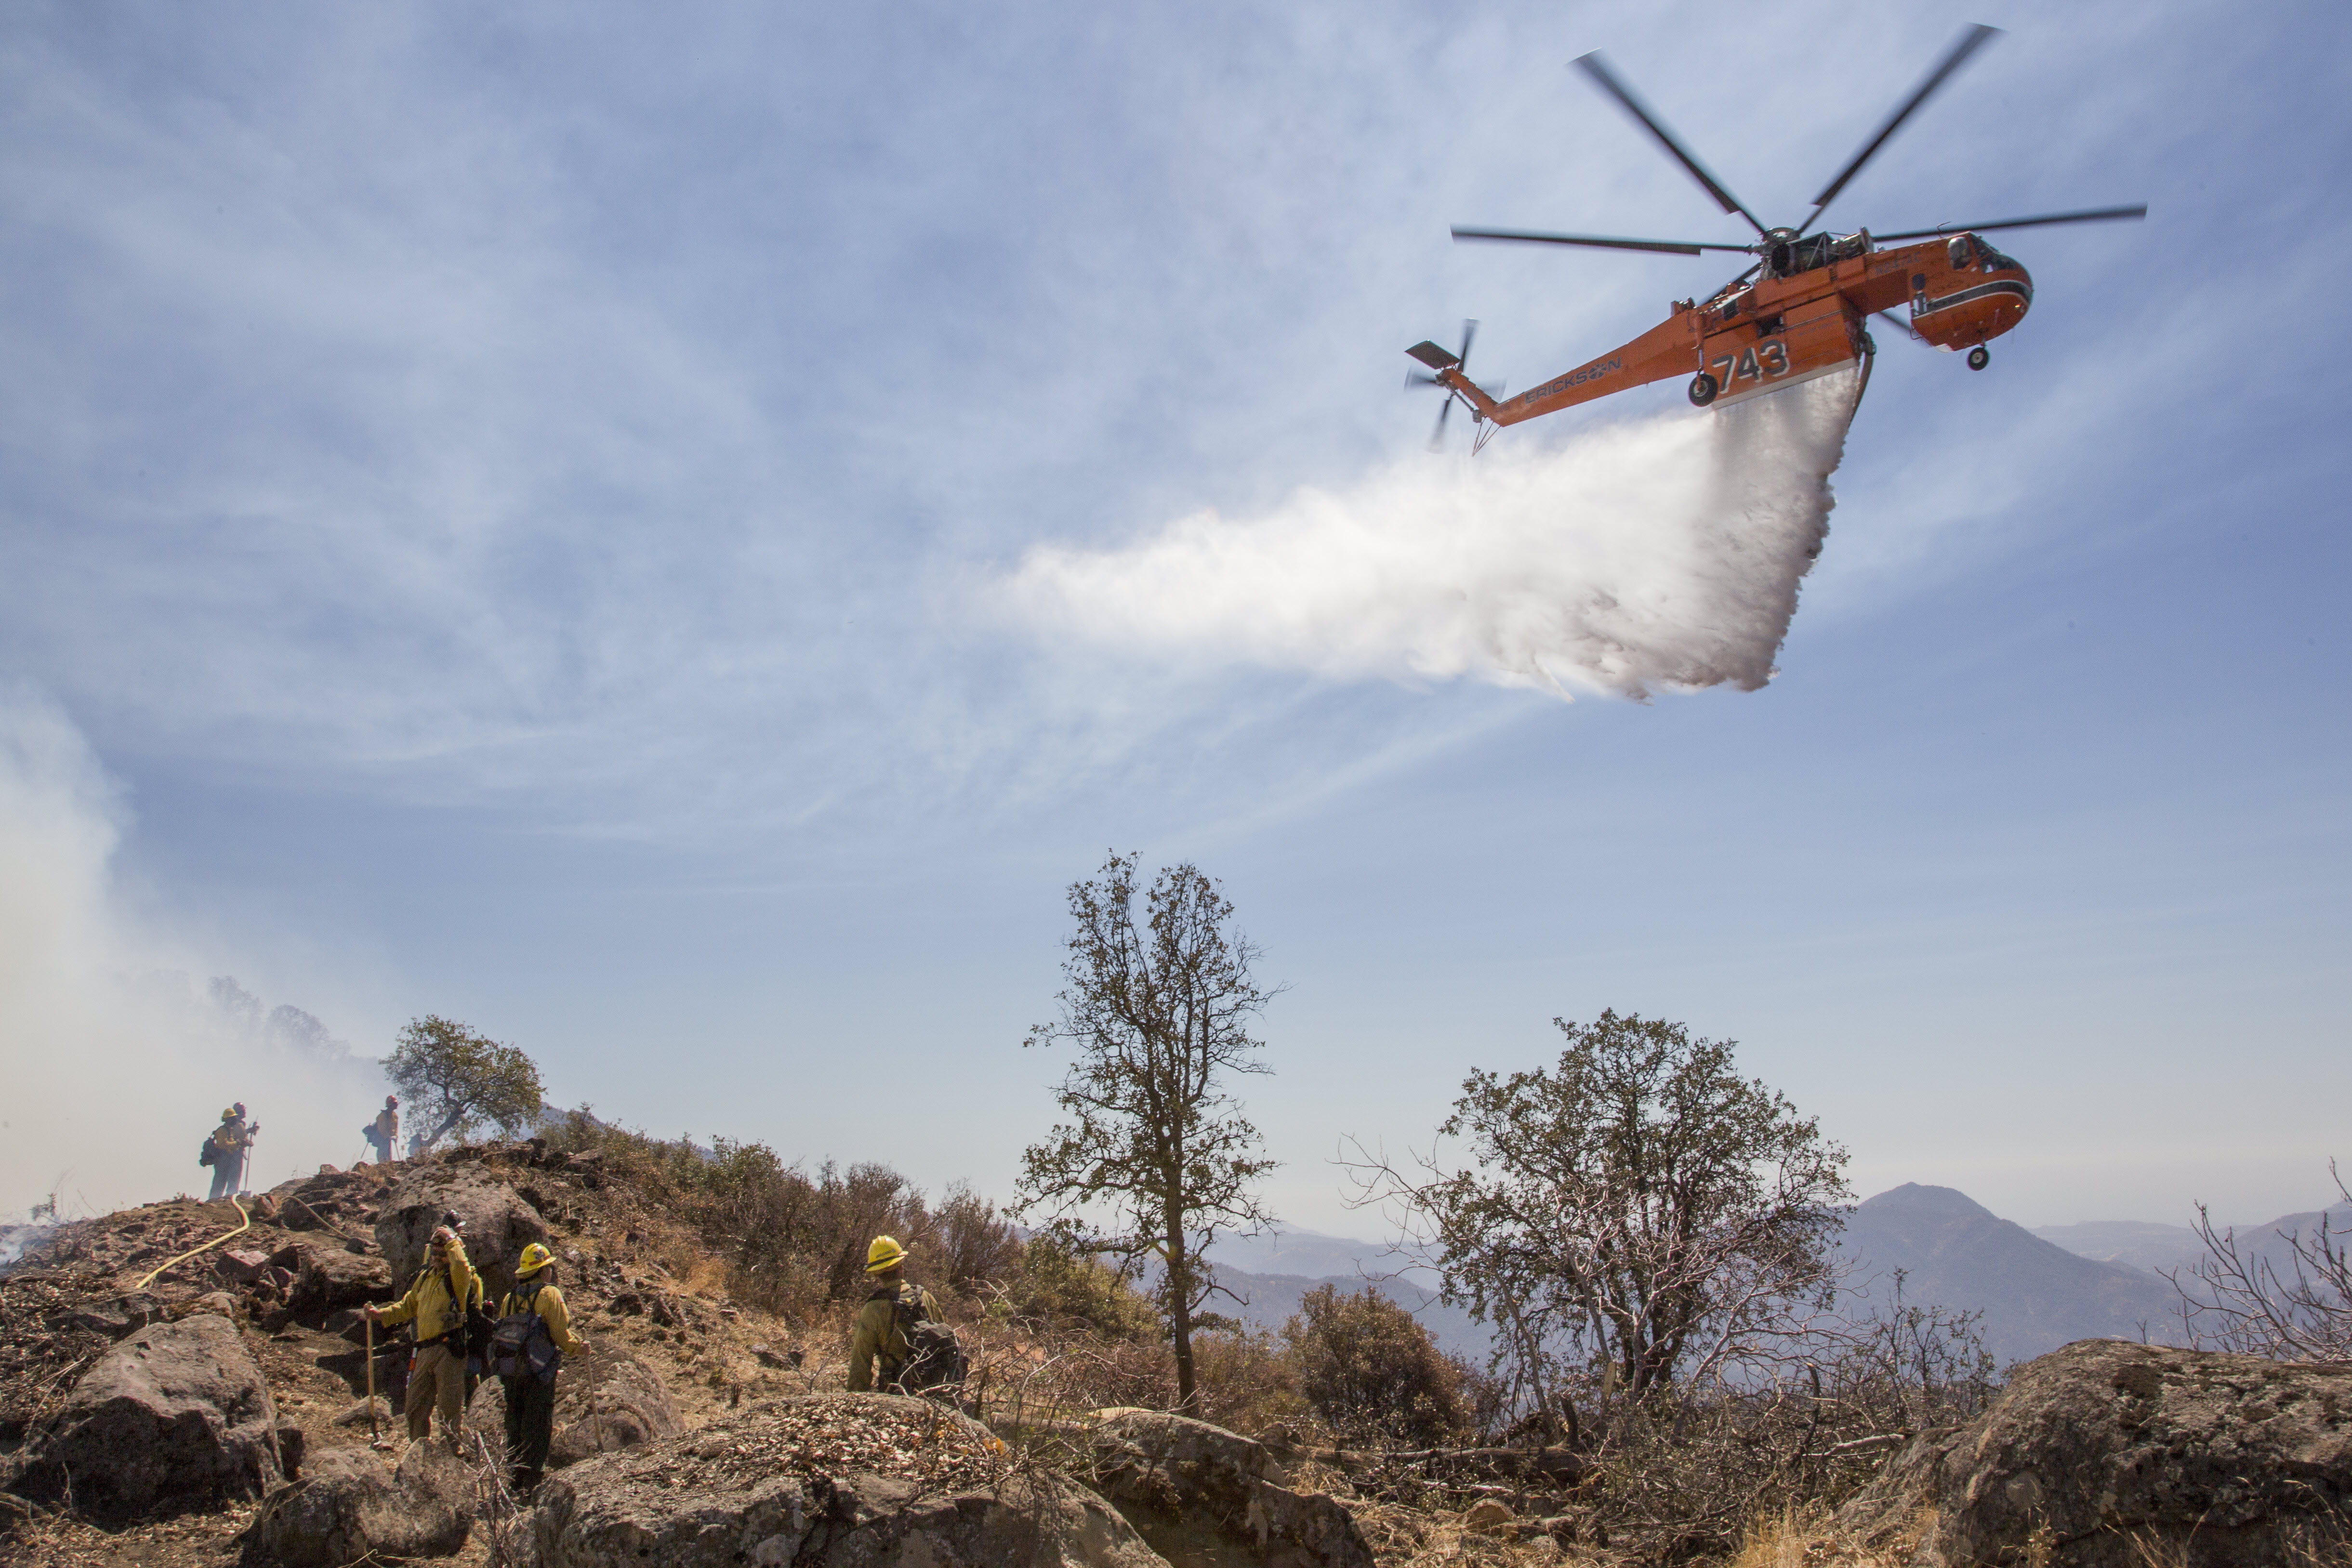 A skycrane helicopter dropping water in the path of a forest fire, between the fire and a number of fire fighters working on top of a mountain.